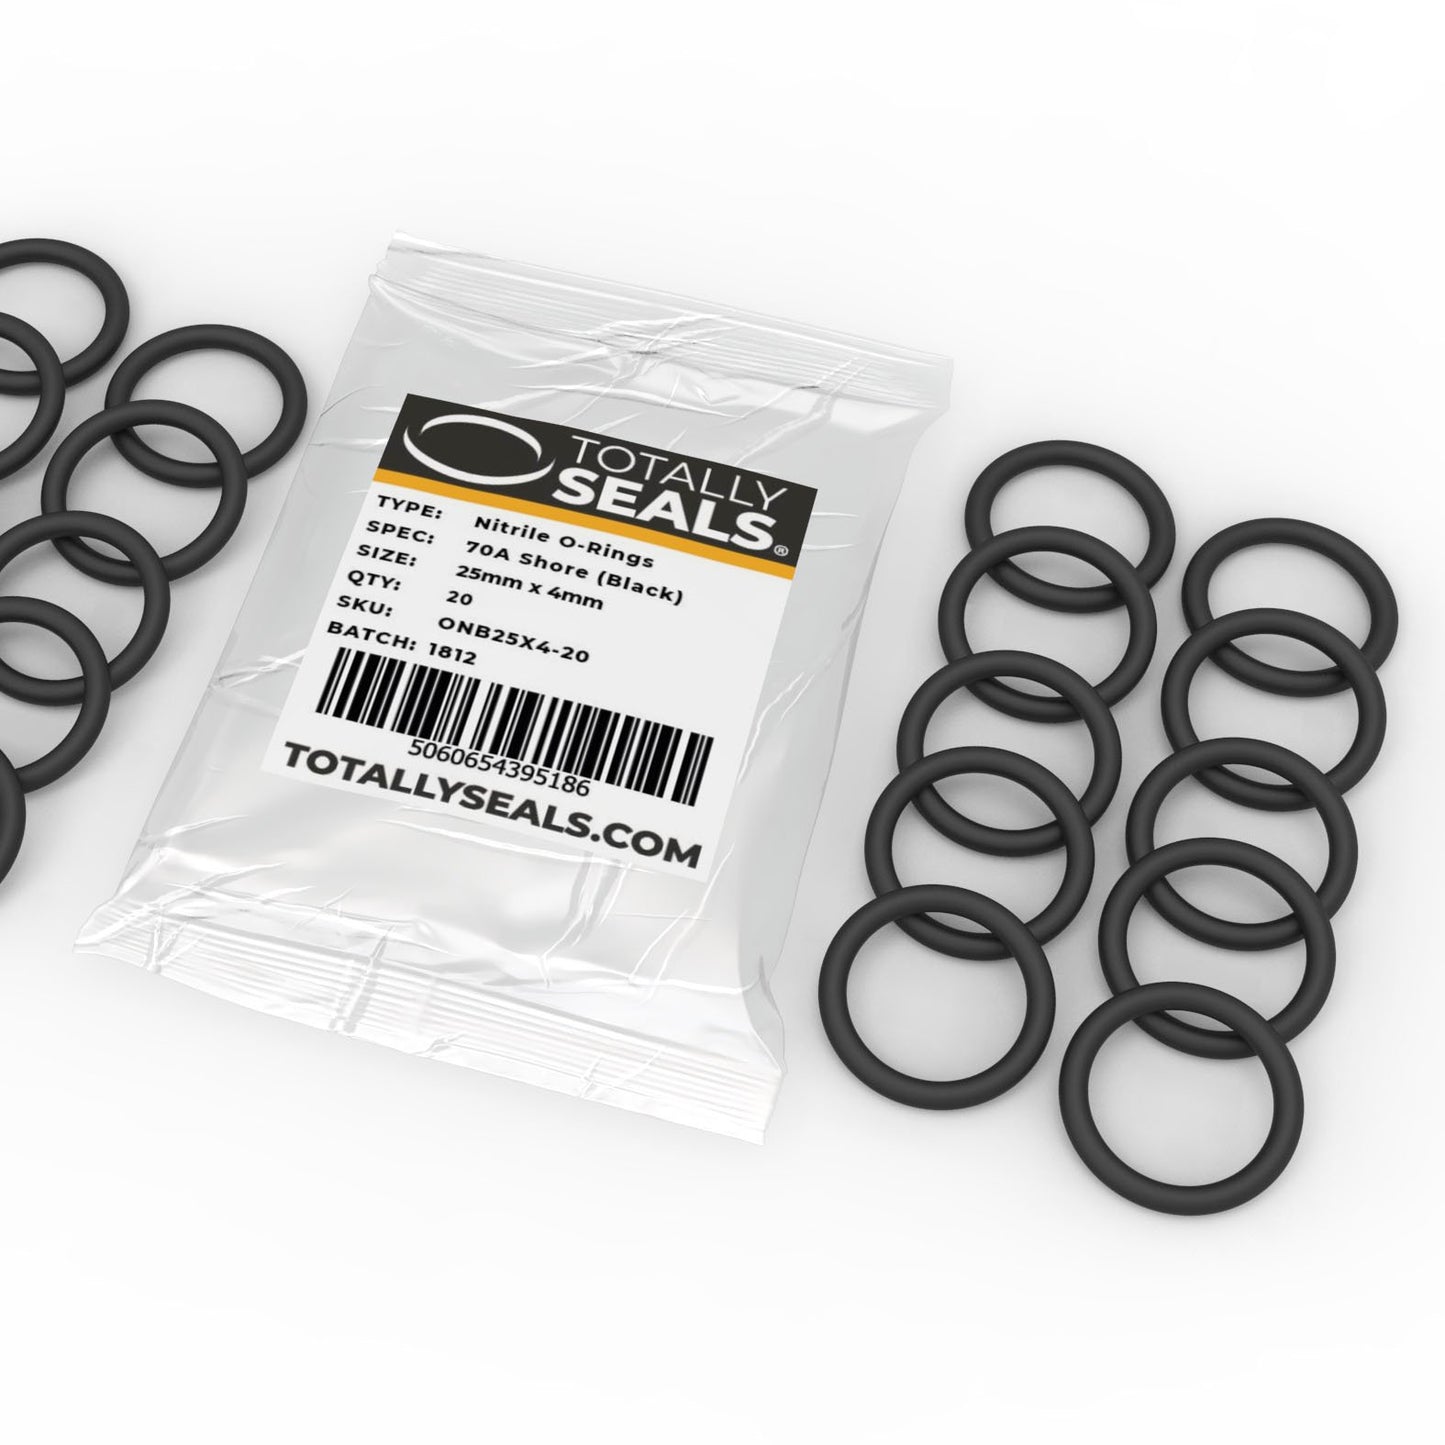 25mm x 4mm (33mm OD) Nitrile O-Rings - Totally Seals®